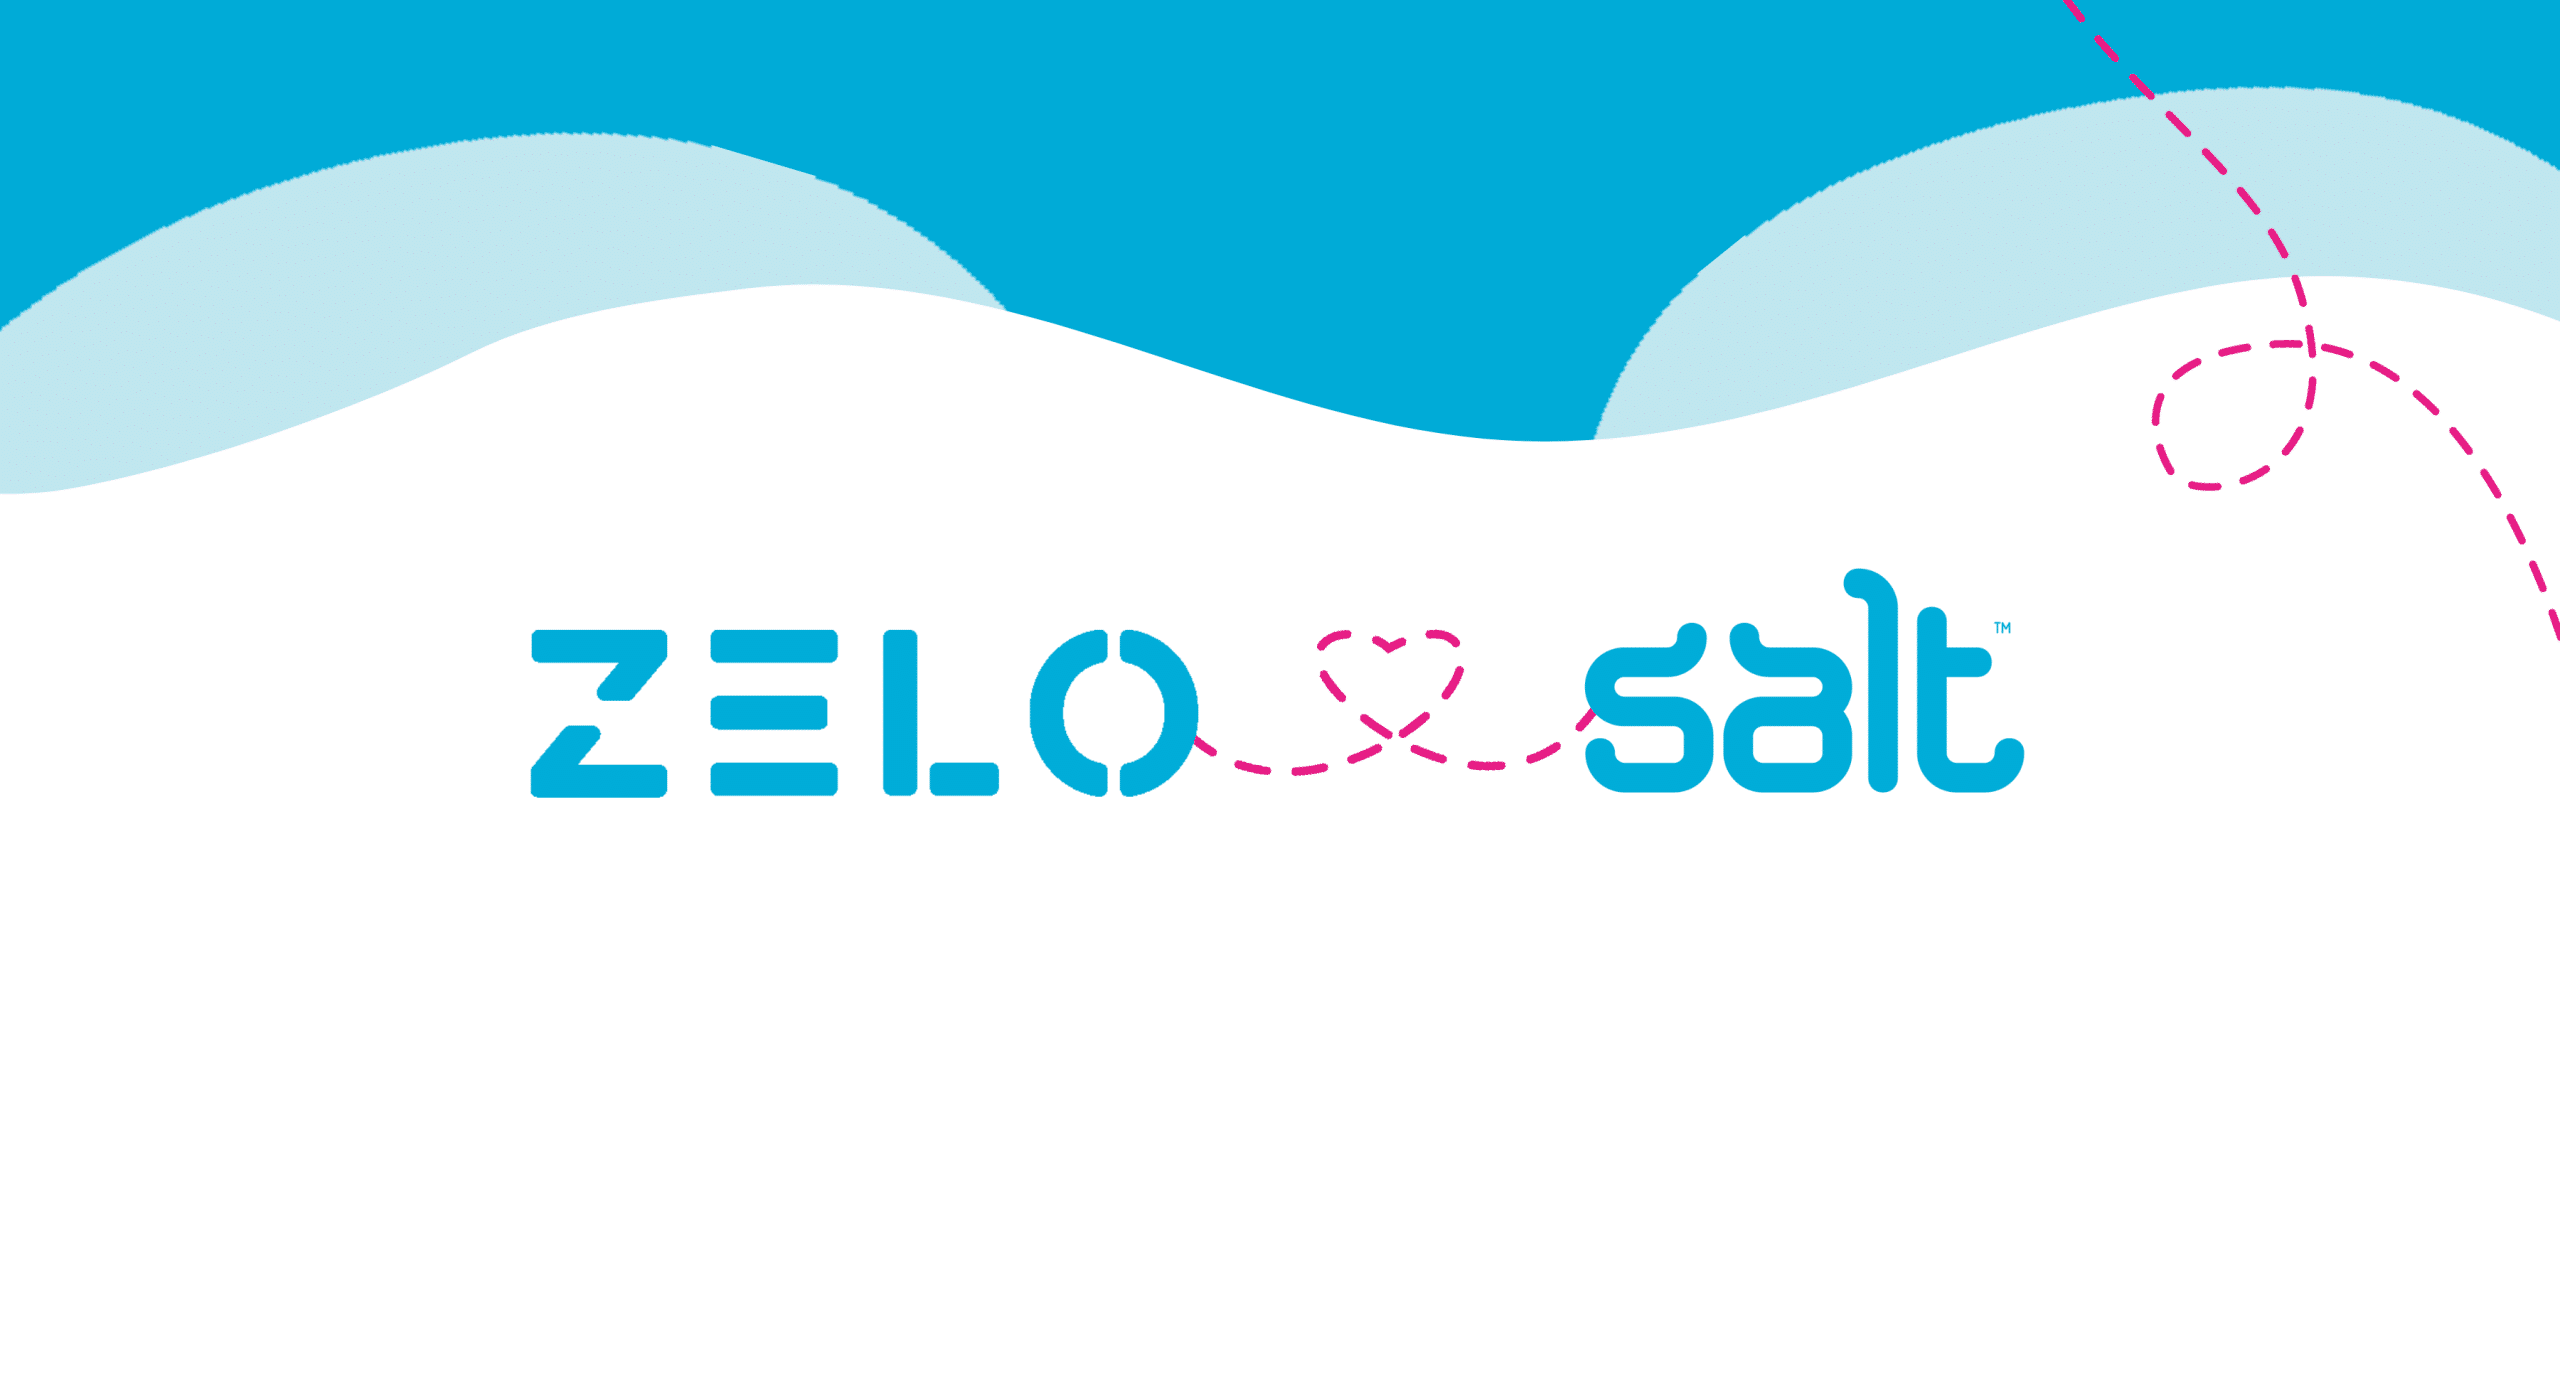 Zero Digital has been acquired by Salt recruitment - image shows both logos and a small heart between them